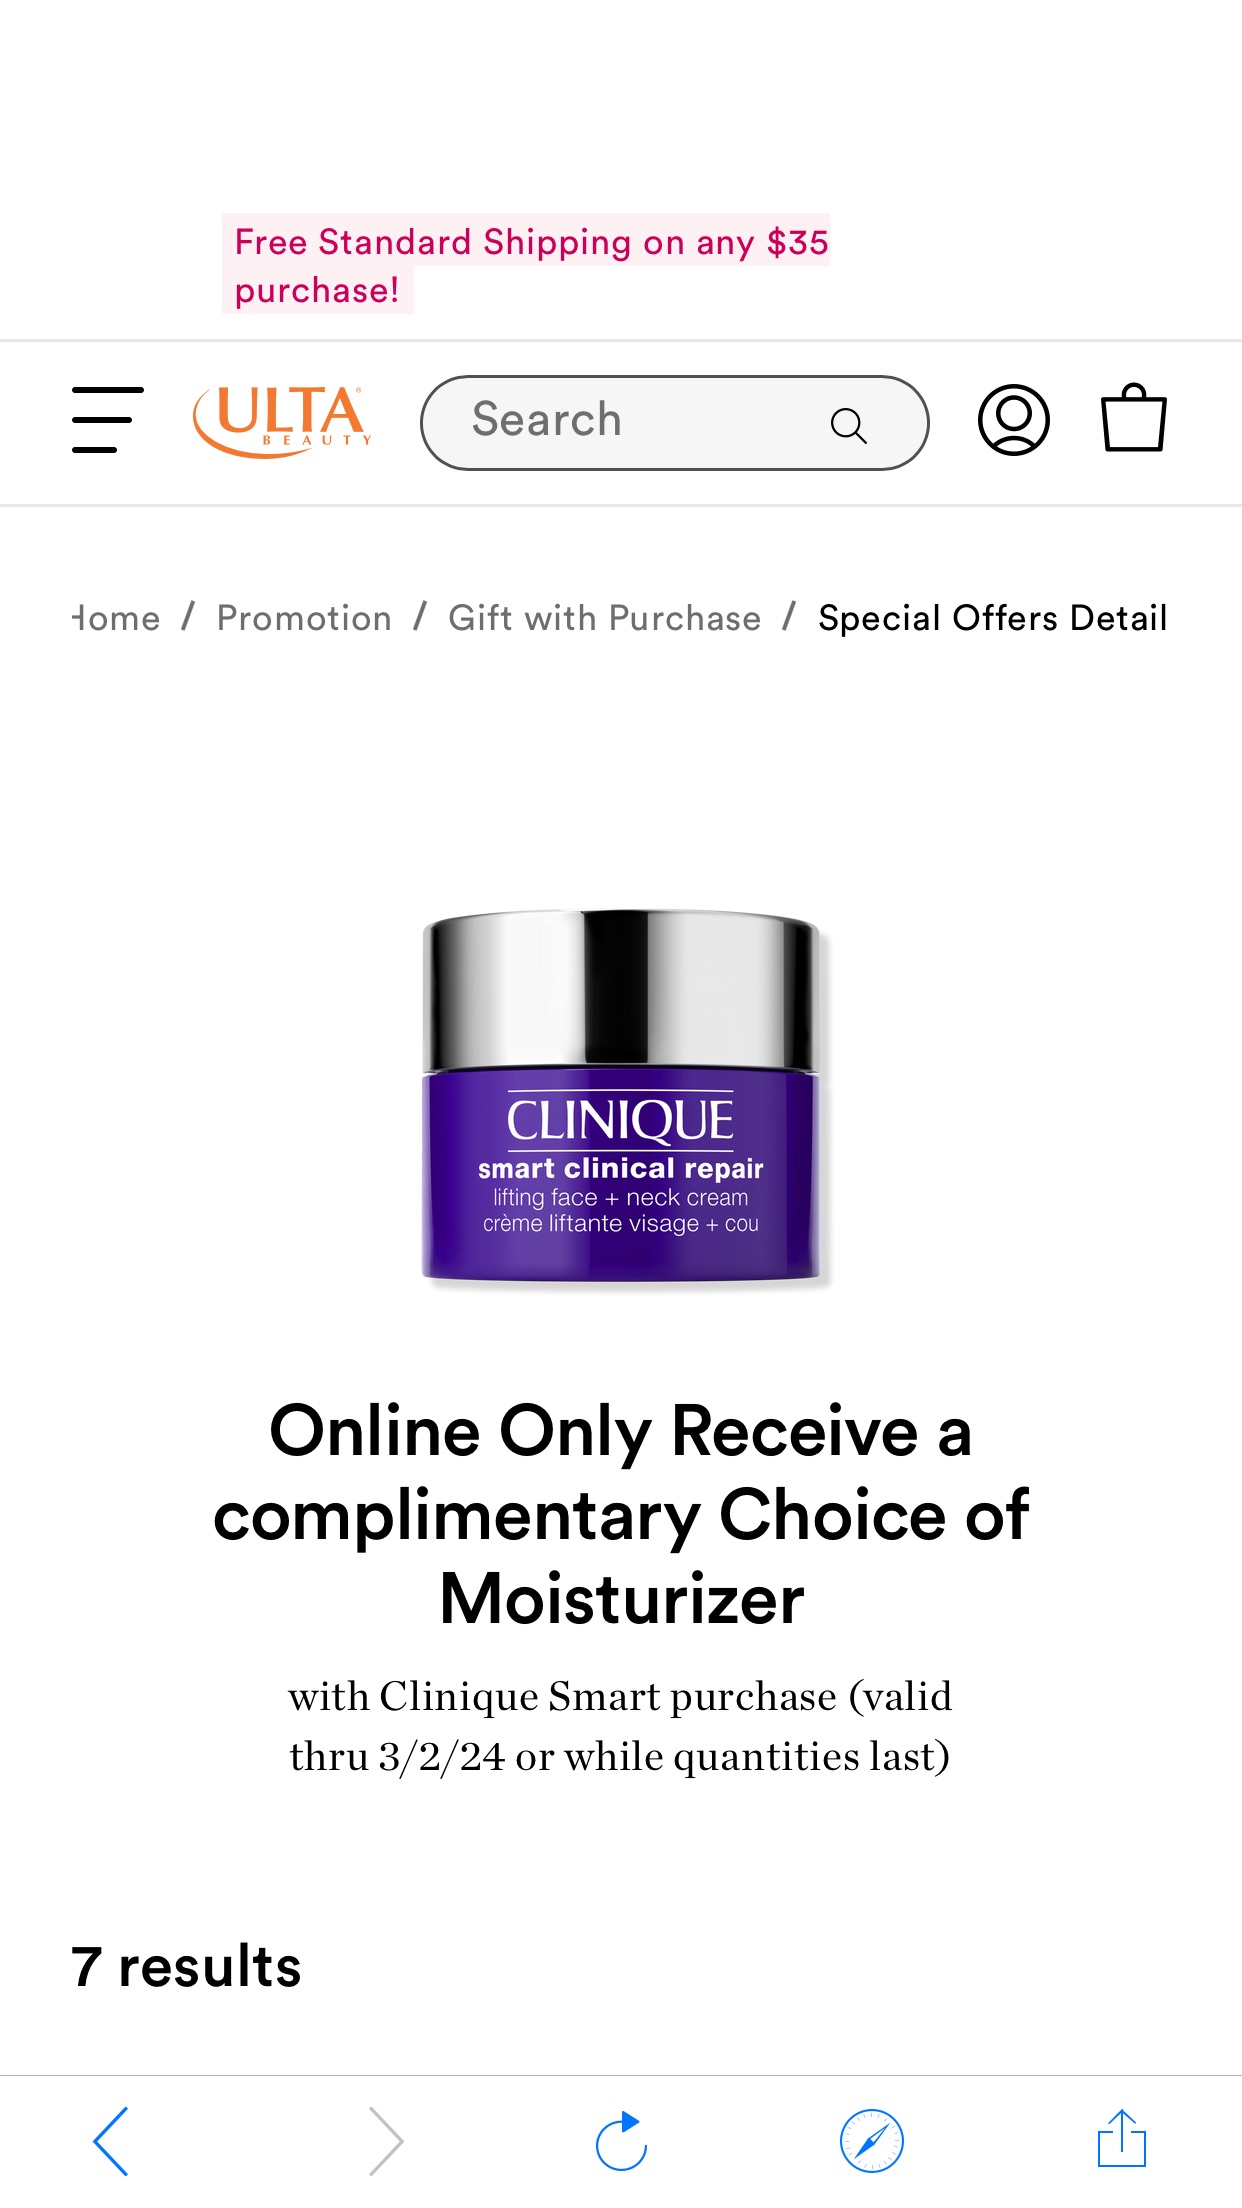 Online Only Receive a complimentary Choice of Moisturizer | Ulta Beauty 买一送四个赠品